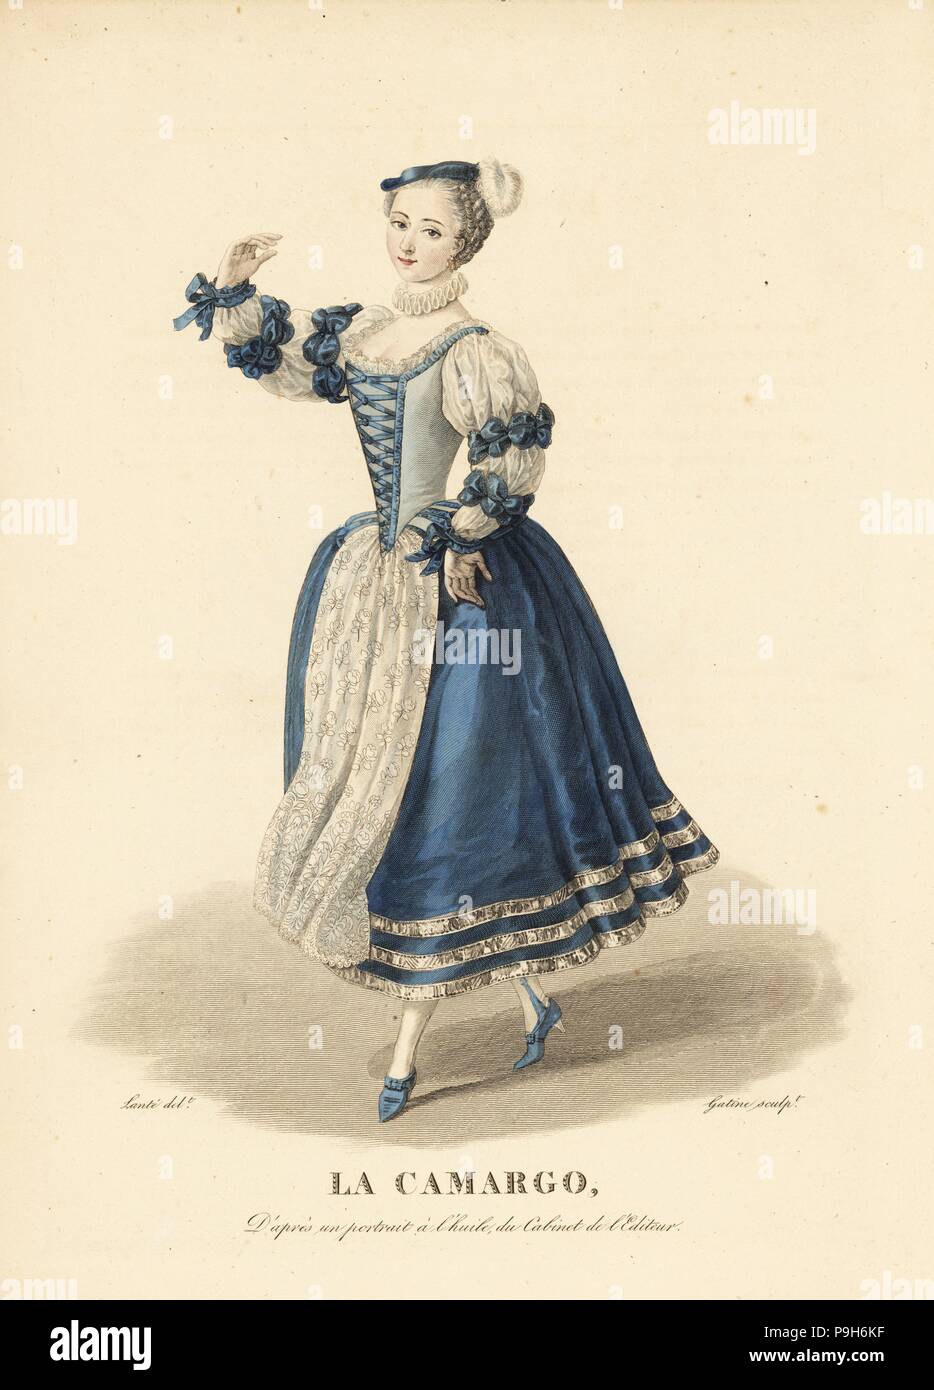 Marie Anne Cuppi, Mlle. La Camargo, famous ballet dancer, 1710-1770. She wears a small cap, ruff collar, dress with laced bodice, lace sleeves tied with ribbons, apron and calf-length skirt and high-heel shoes. After a portrait in oils in the editor's collection. Handcoloured copperplate engraving by Georges Jacques Gatine after an illustration by Louis Marie Lante from Galerie Francaise de Femmes Celebres, Paris, 1827. Stock Photo